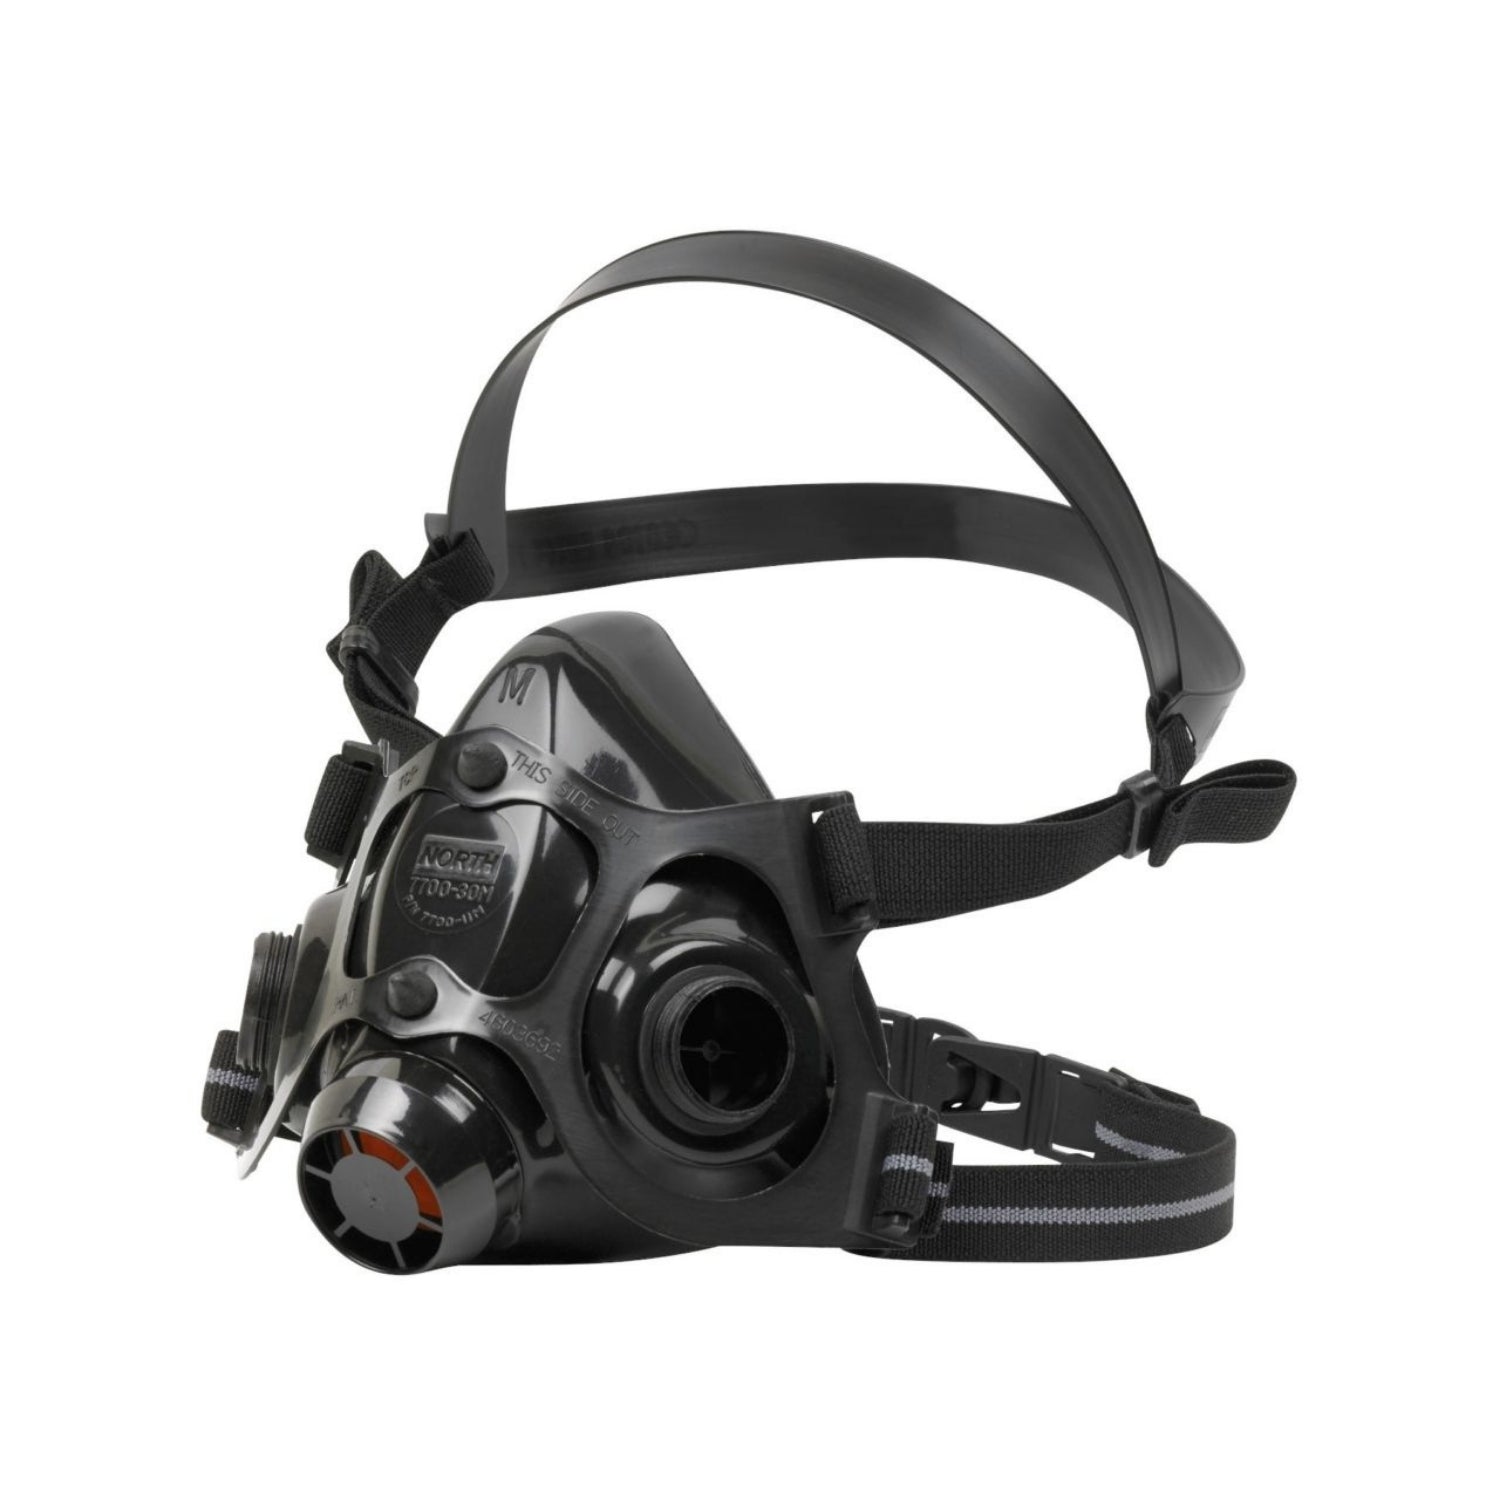 HONEYWELL  7700 Series Half Mask Respirator - Resists Particulates, Chemical, Contamination and Gas, Cradle Suspension, Silicone - Size Medium